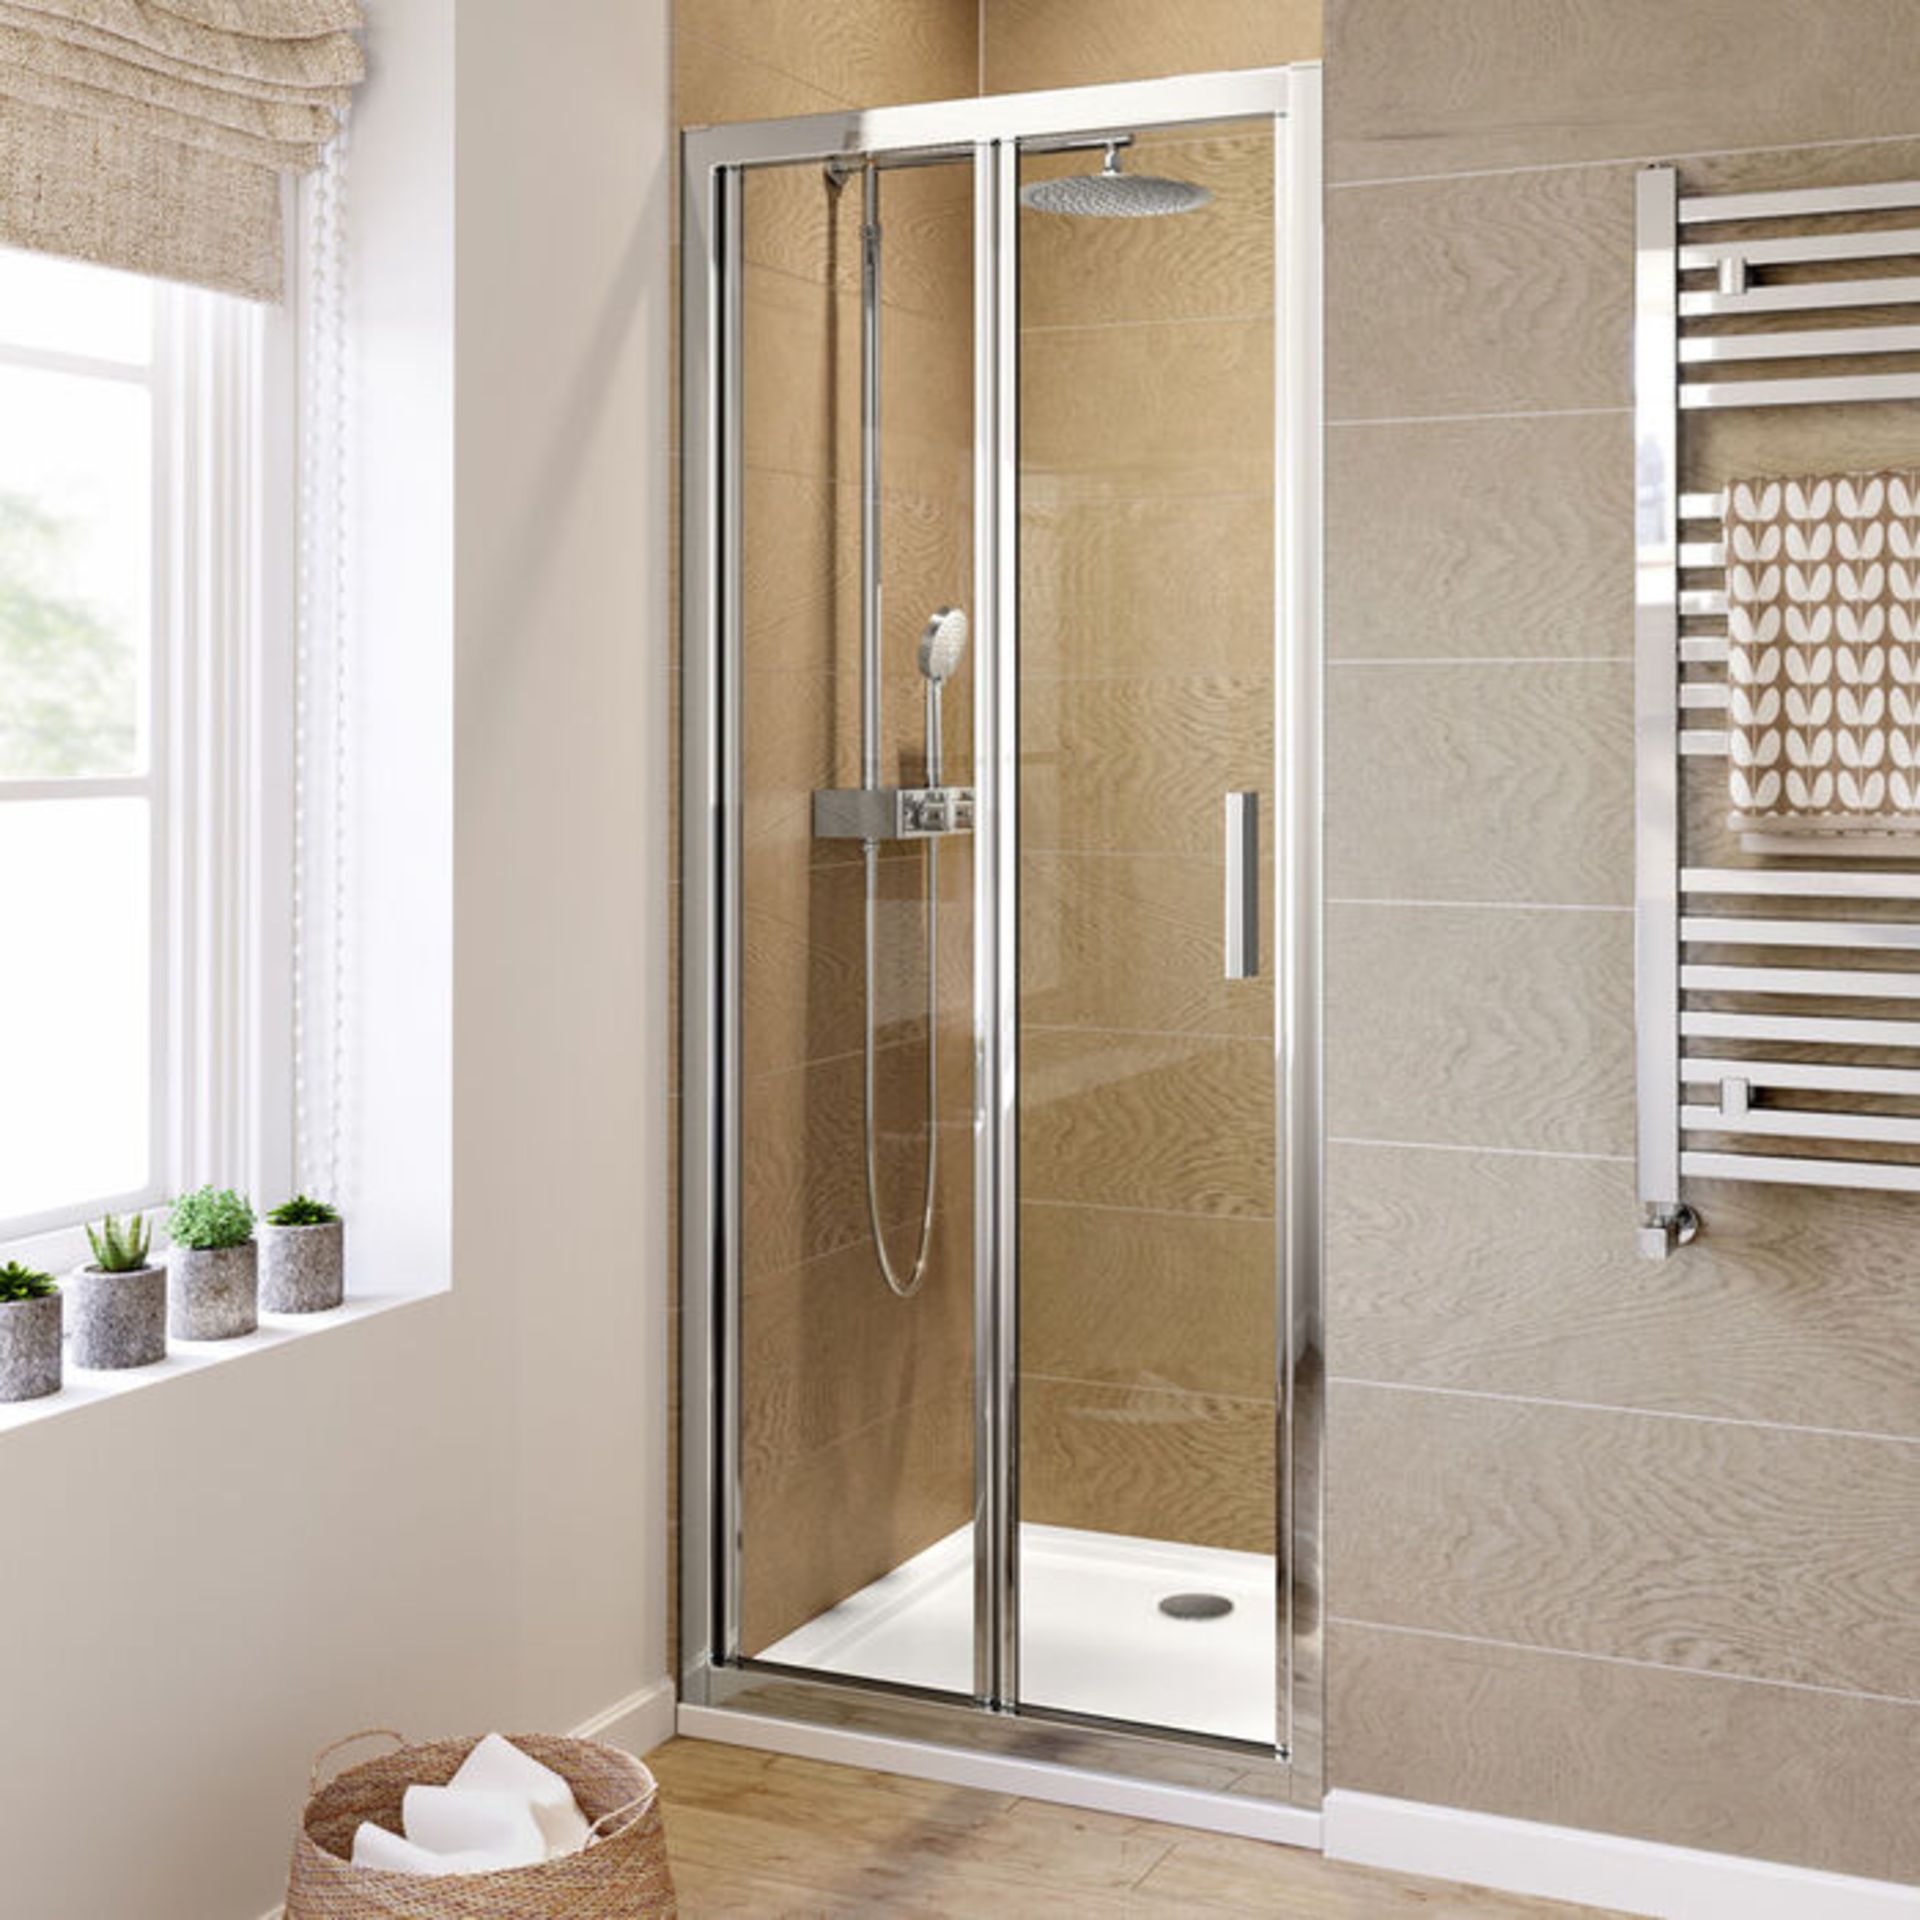 (PM33) 900mm - 6mm Elements EasyClean Bifold Shower Door. RRP £299.99. We love this because B... - Image 2 of 3